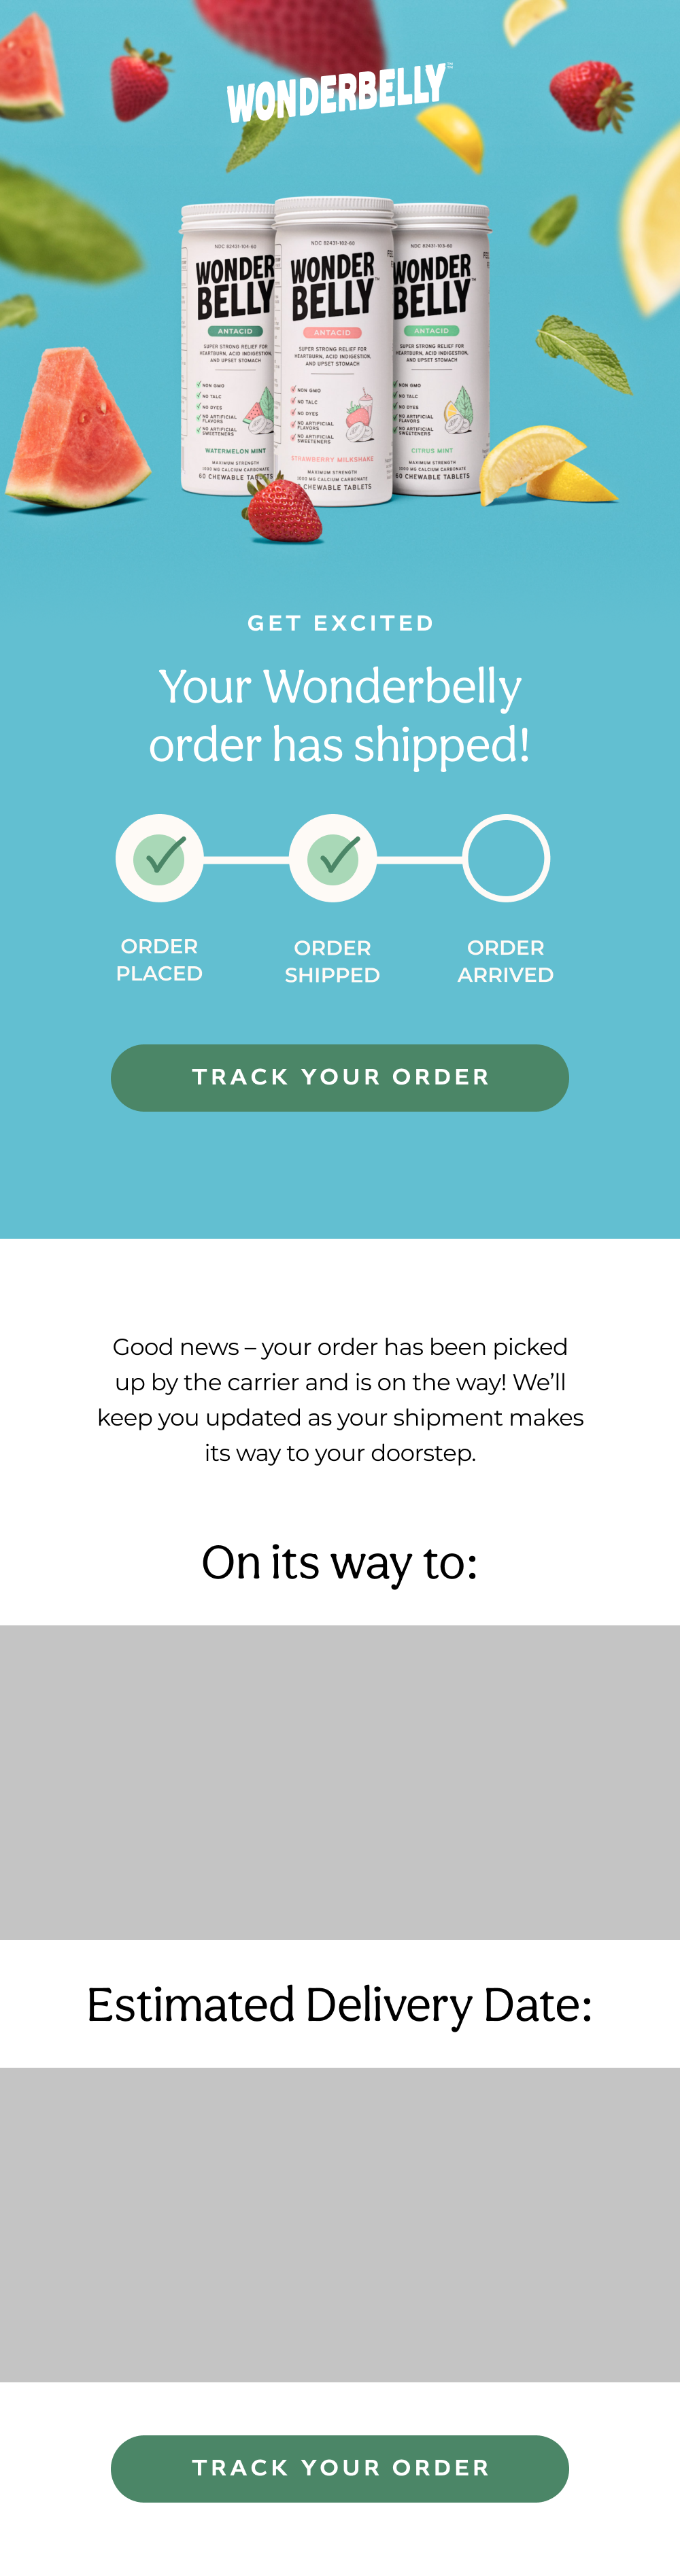 Wonderbelly Shipment Created Food and Beverage Email Template 